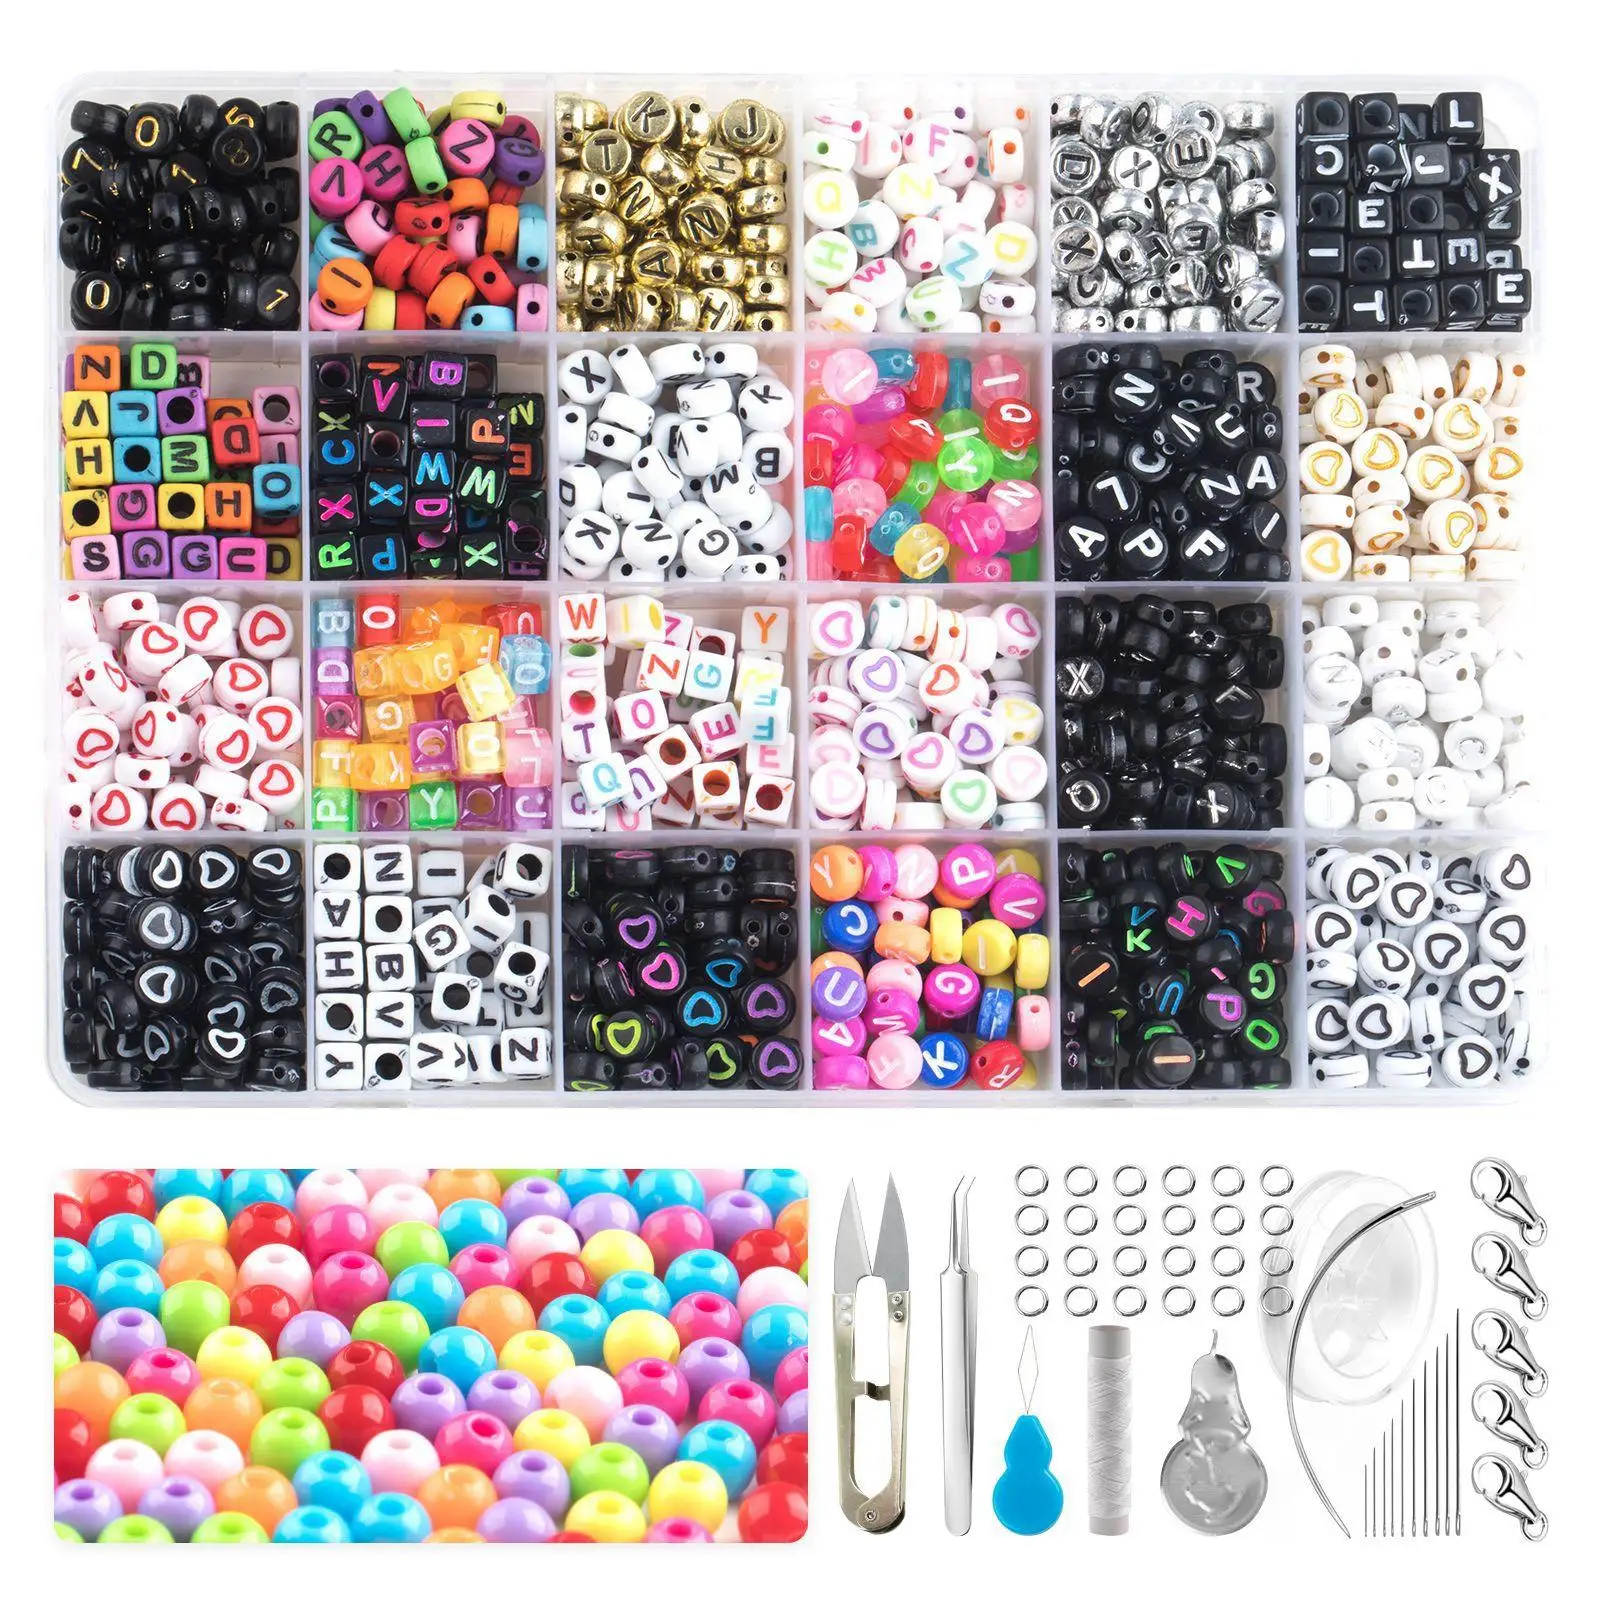 Alphabet Letter Beads Combination Set Squared Accessories Charms Child Puzzle Beads for Making DIY Crafts Colorful Crafting Kids